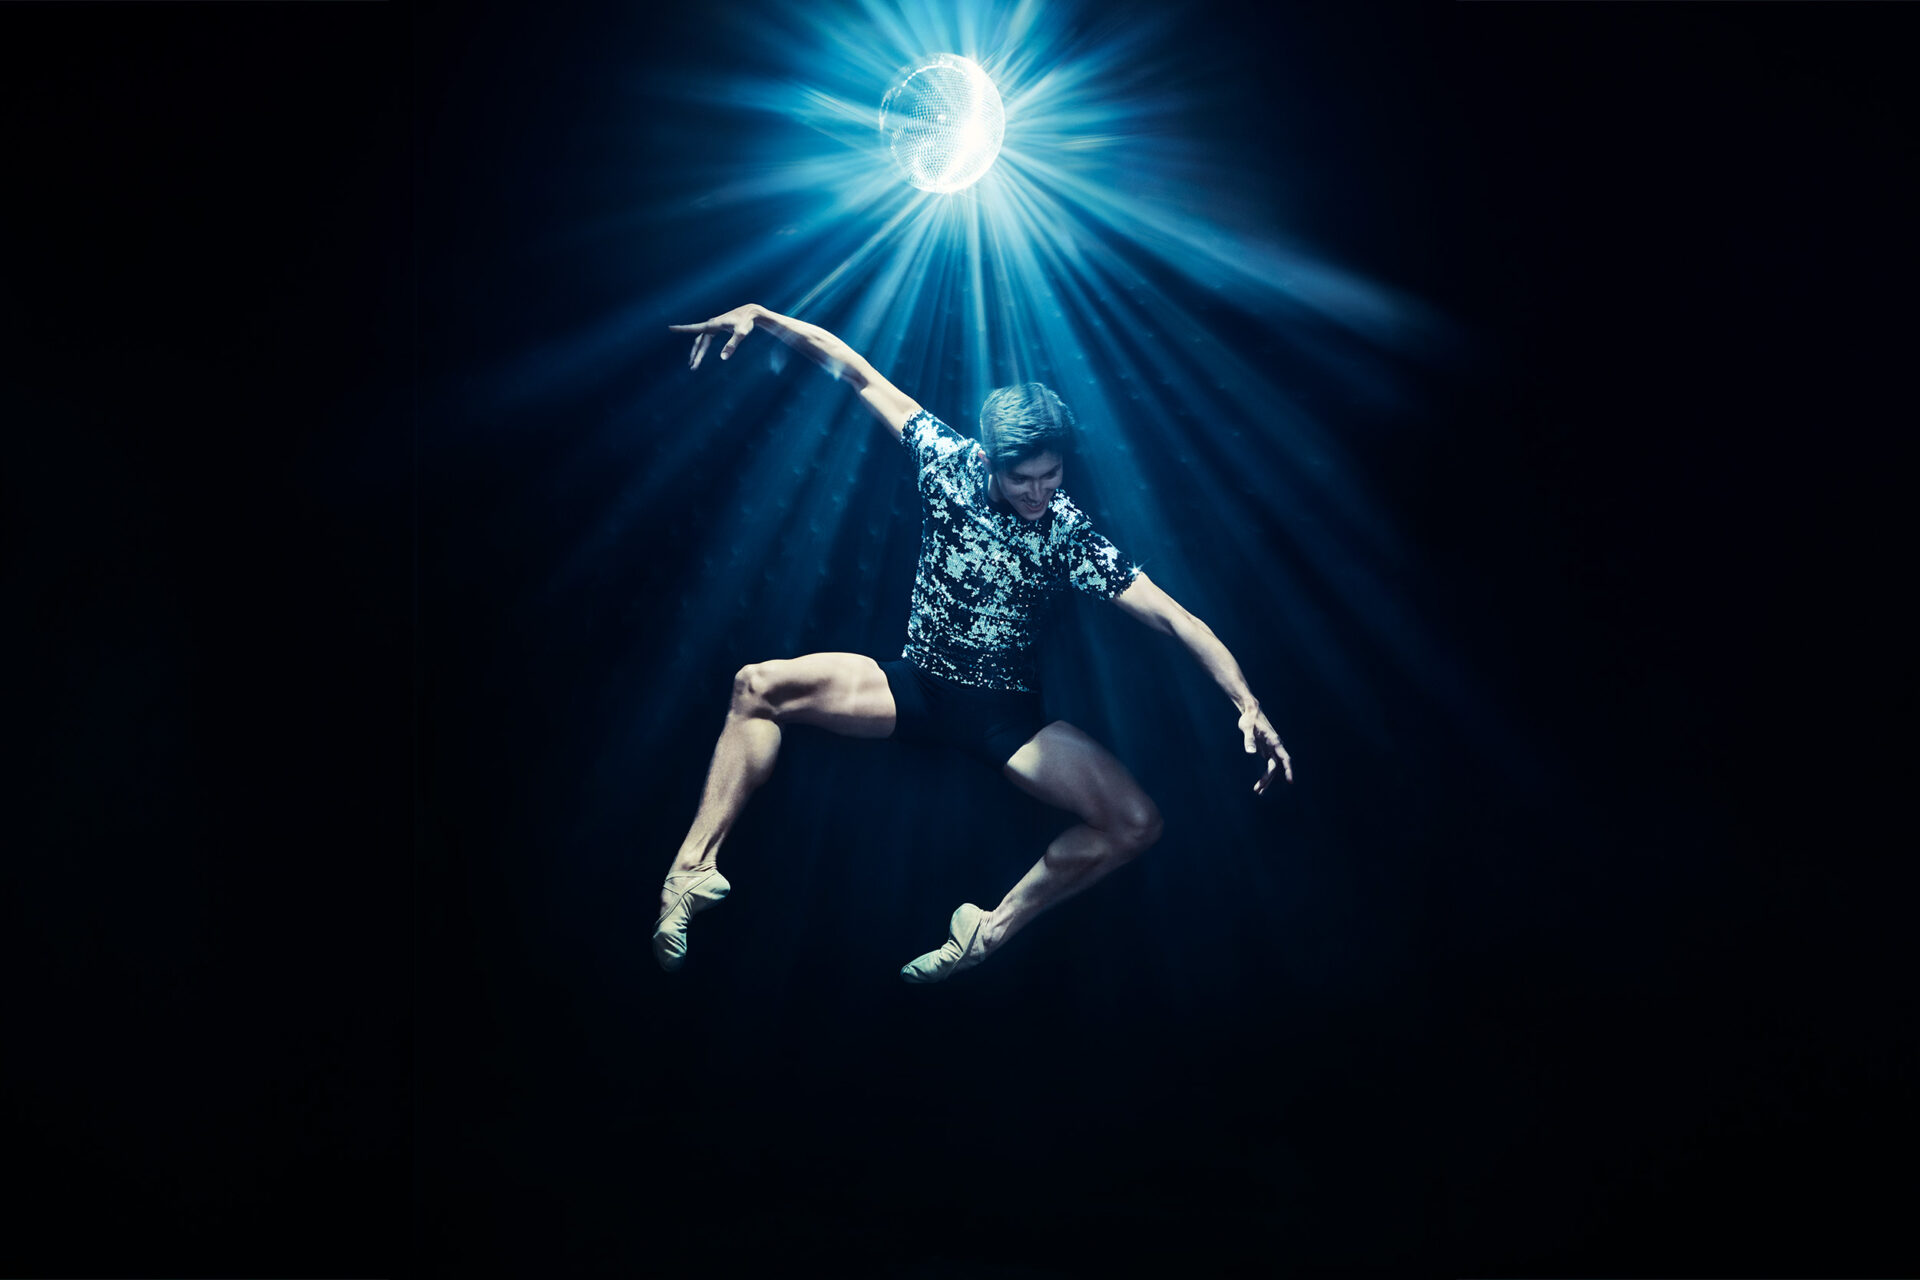 A dancer is jumping in a pas de chat, seemingly floating over a dark background lit only by an exciting disco ball. He's smiling and wearing a textured black and white shirt and black shorts.